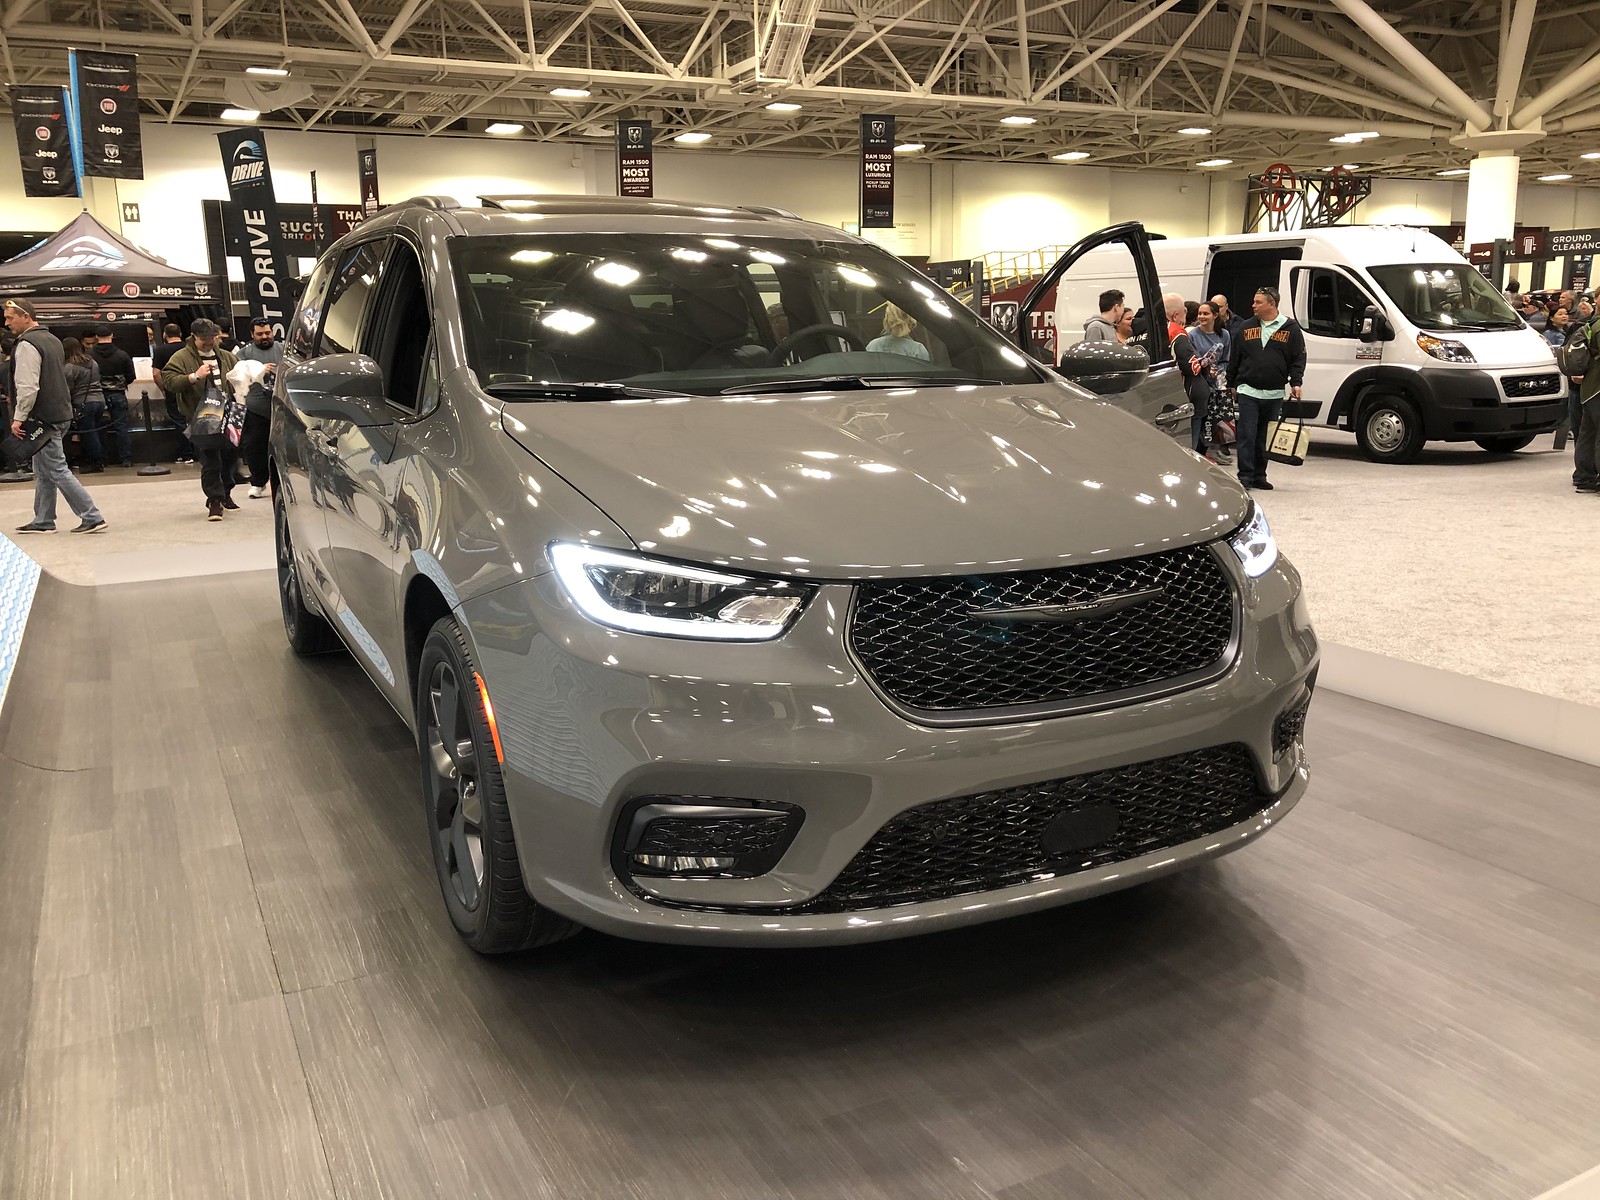 2021 Chrysler Pacifica Gray Twin Cities Auto Show